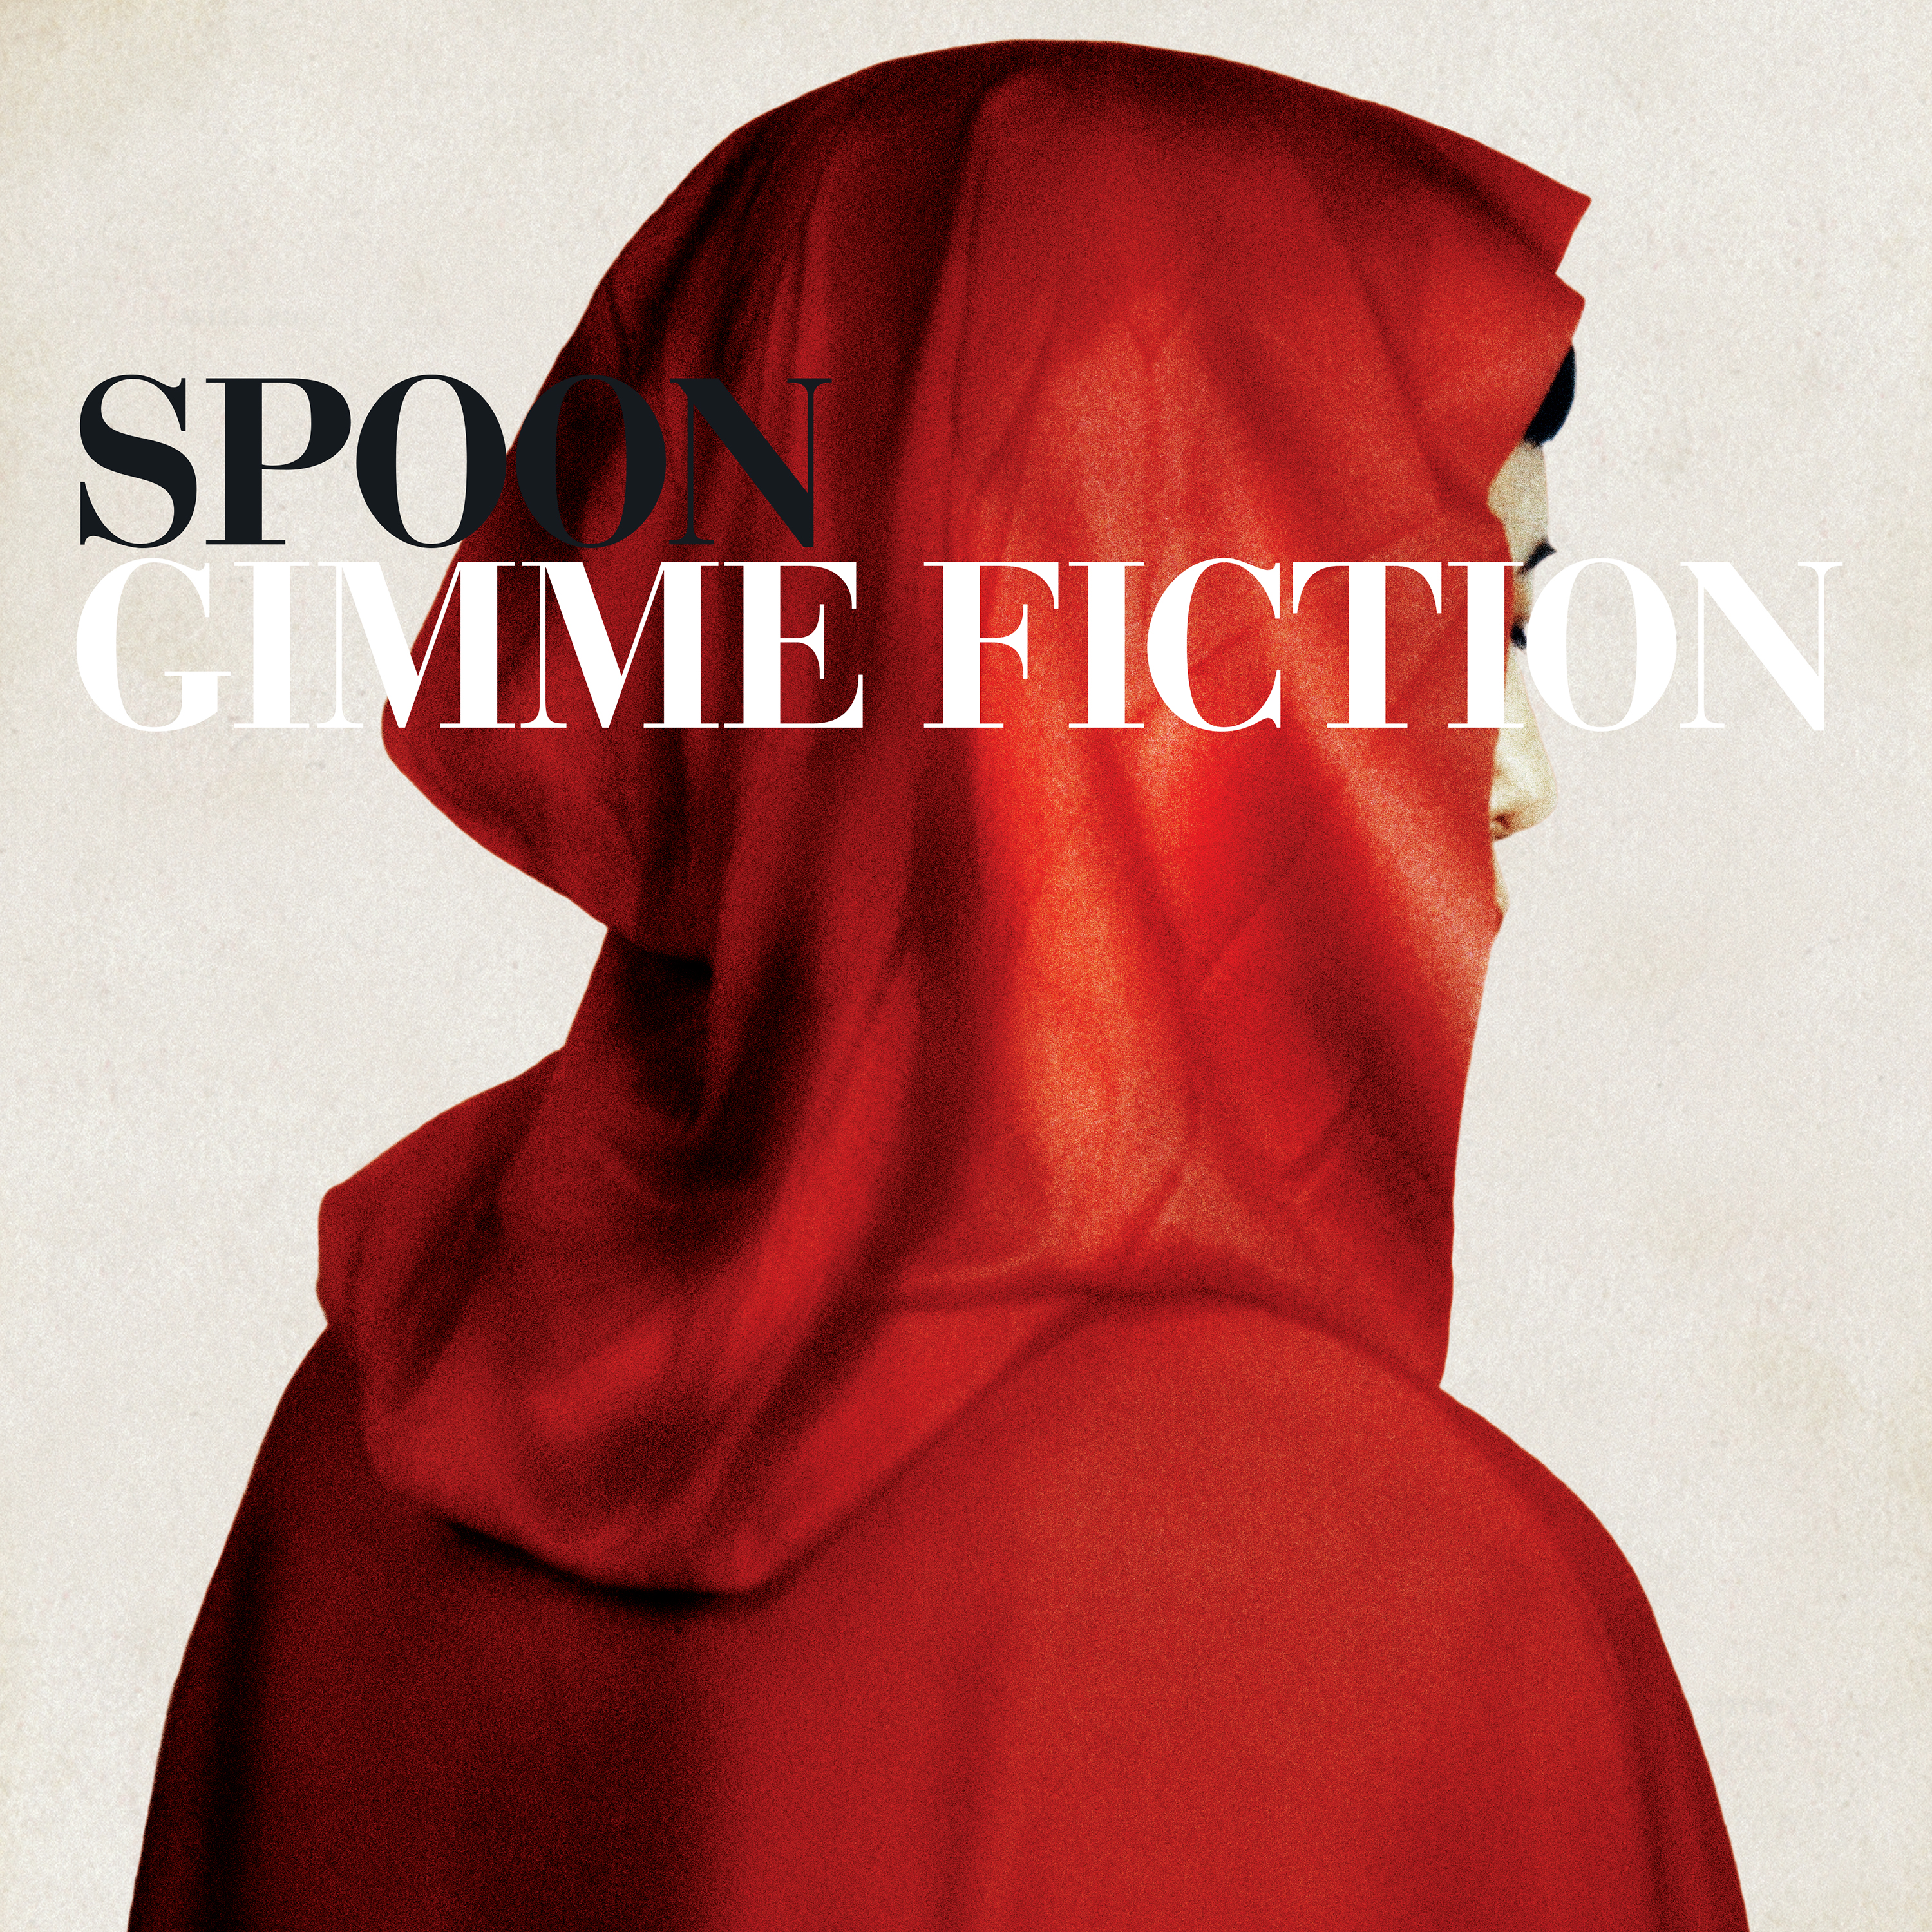 Spoon - Gimme Fiction (Deluxe edition) - 2xCD